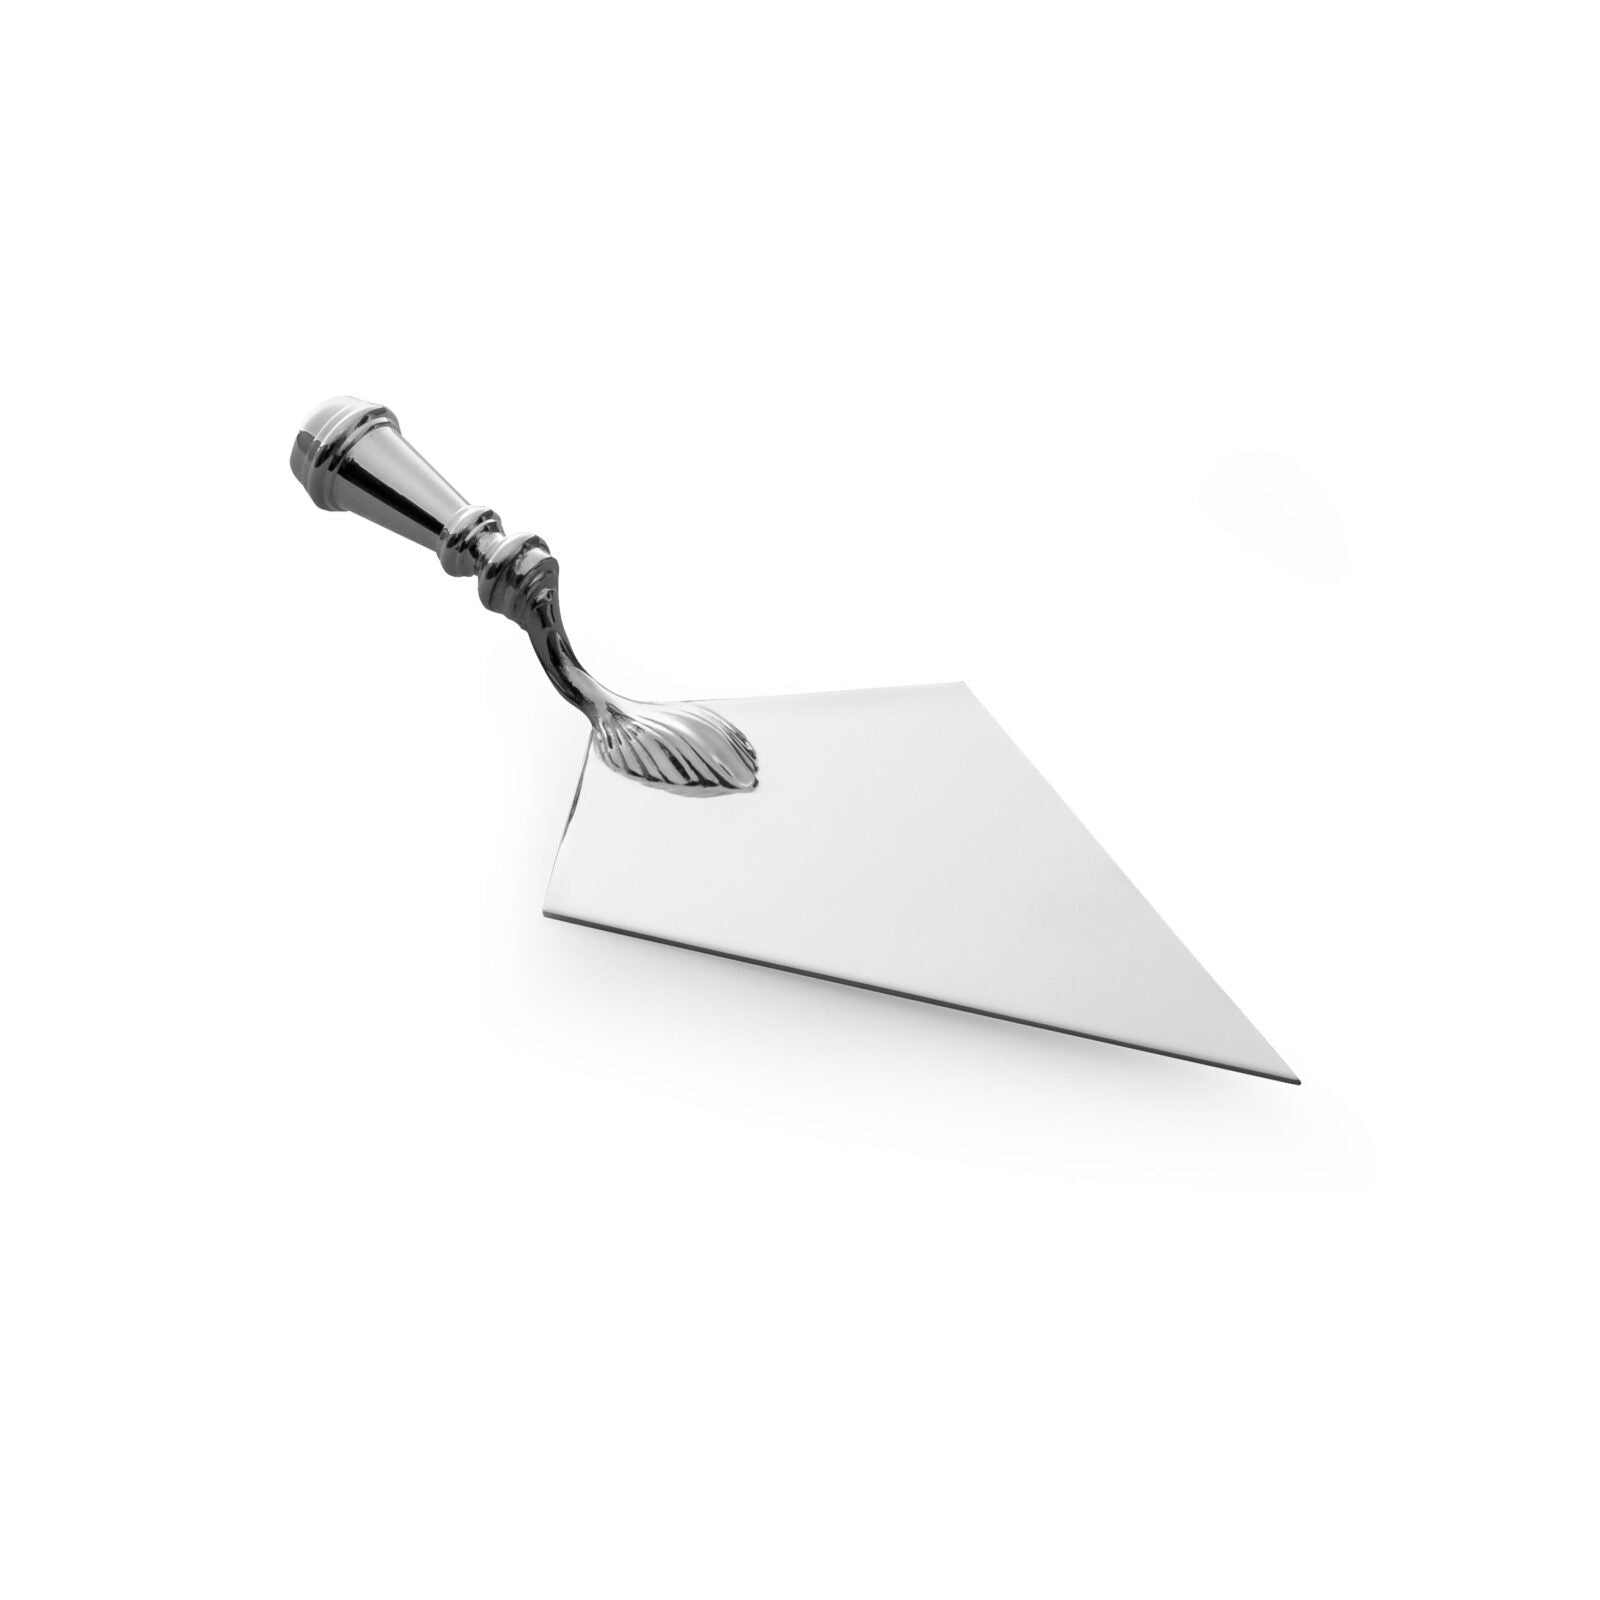 Silver Plated 6in Trowel - No Box